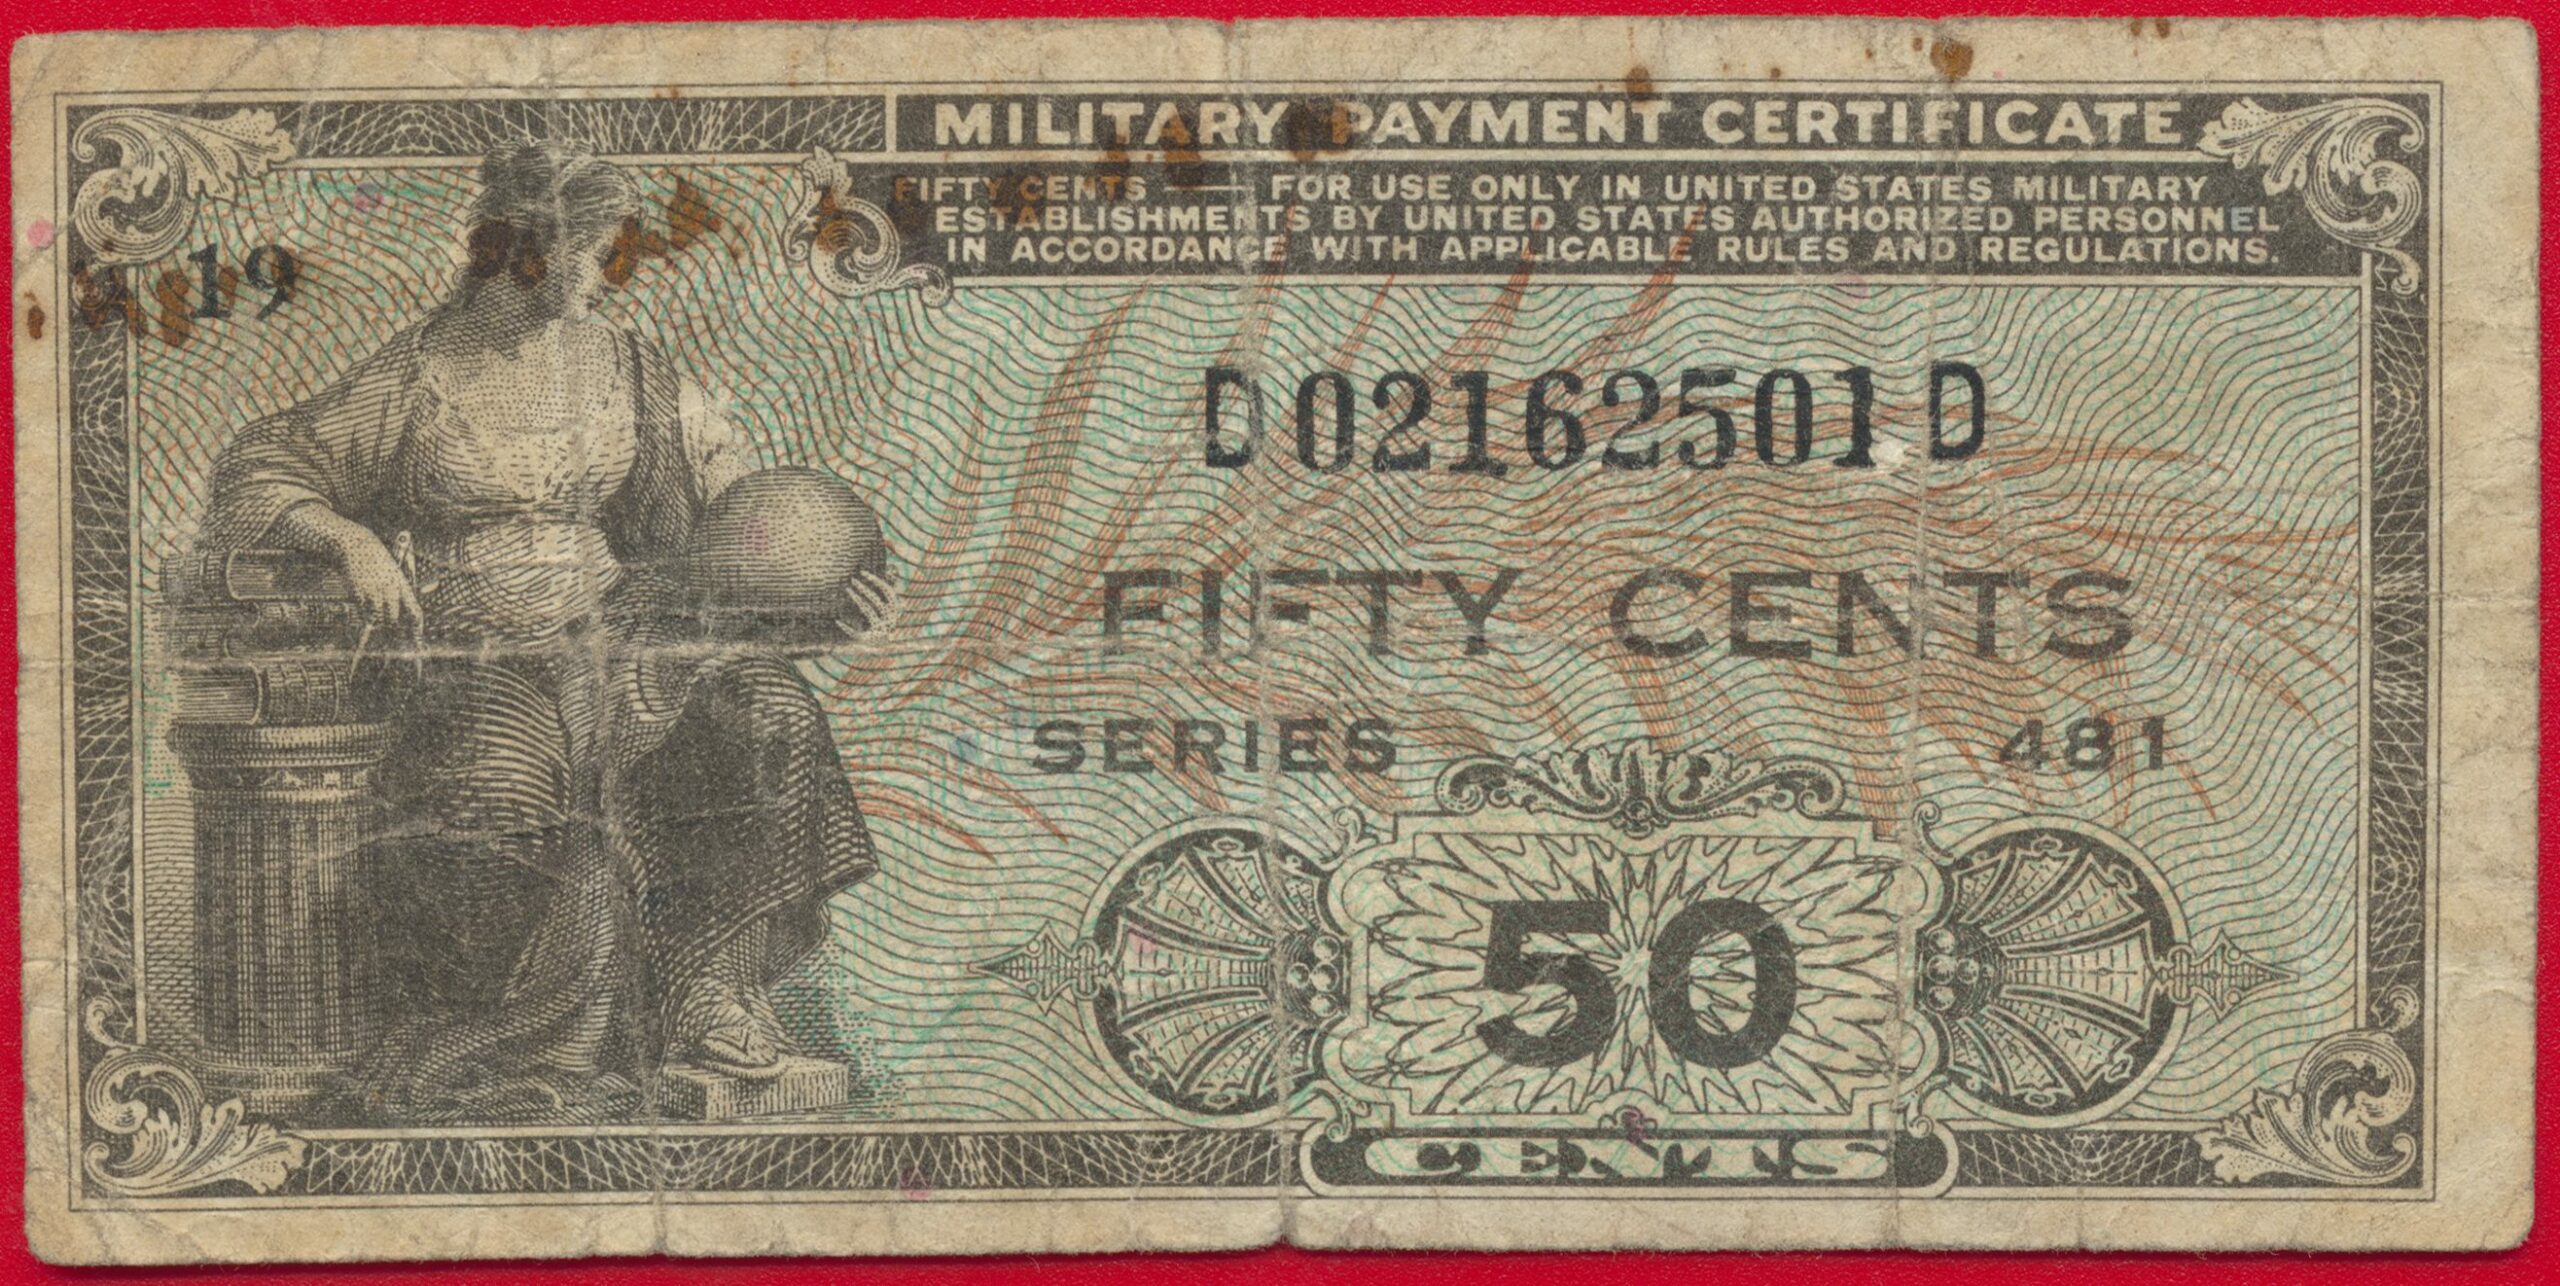 certificate-military-payment-fice-50-cents-2501